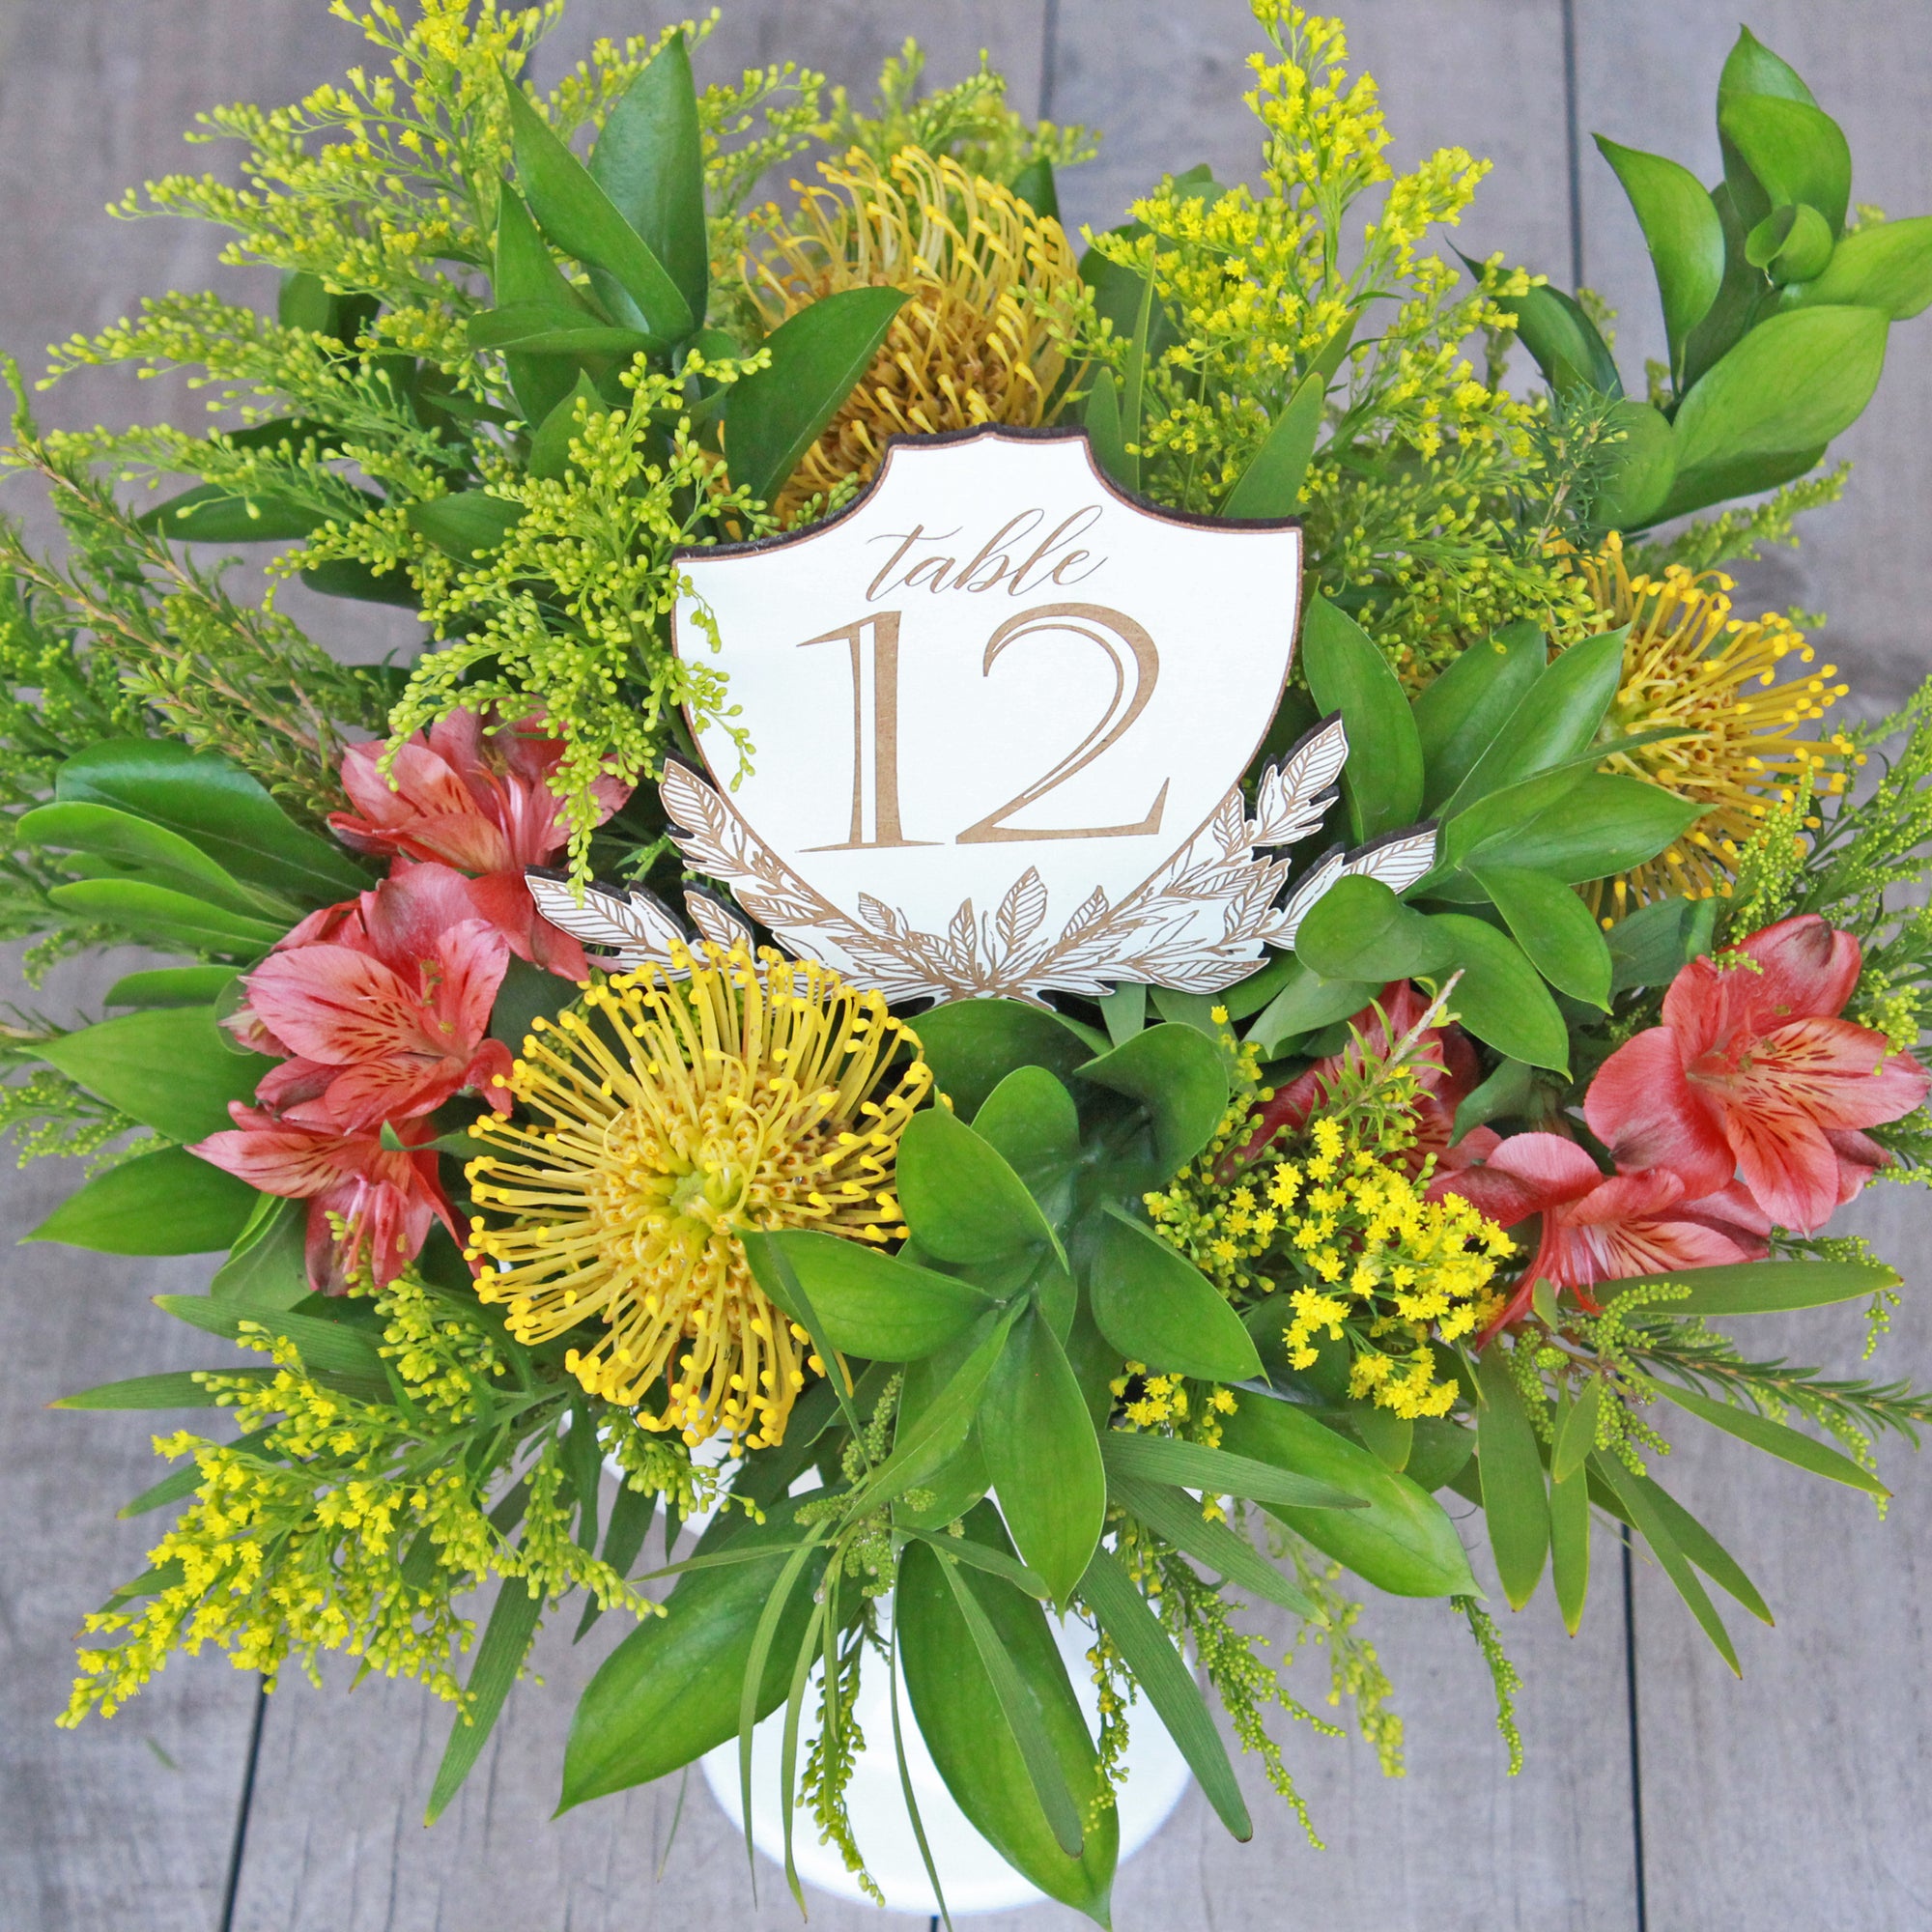 Crest Centerpiece Table Numbers